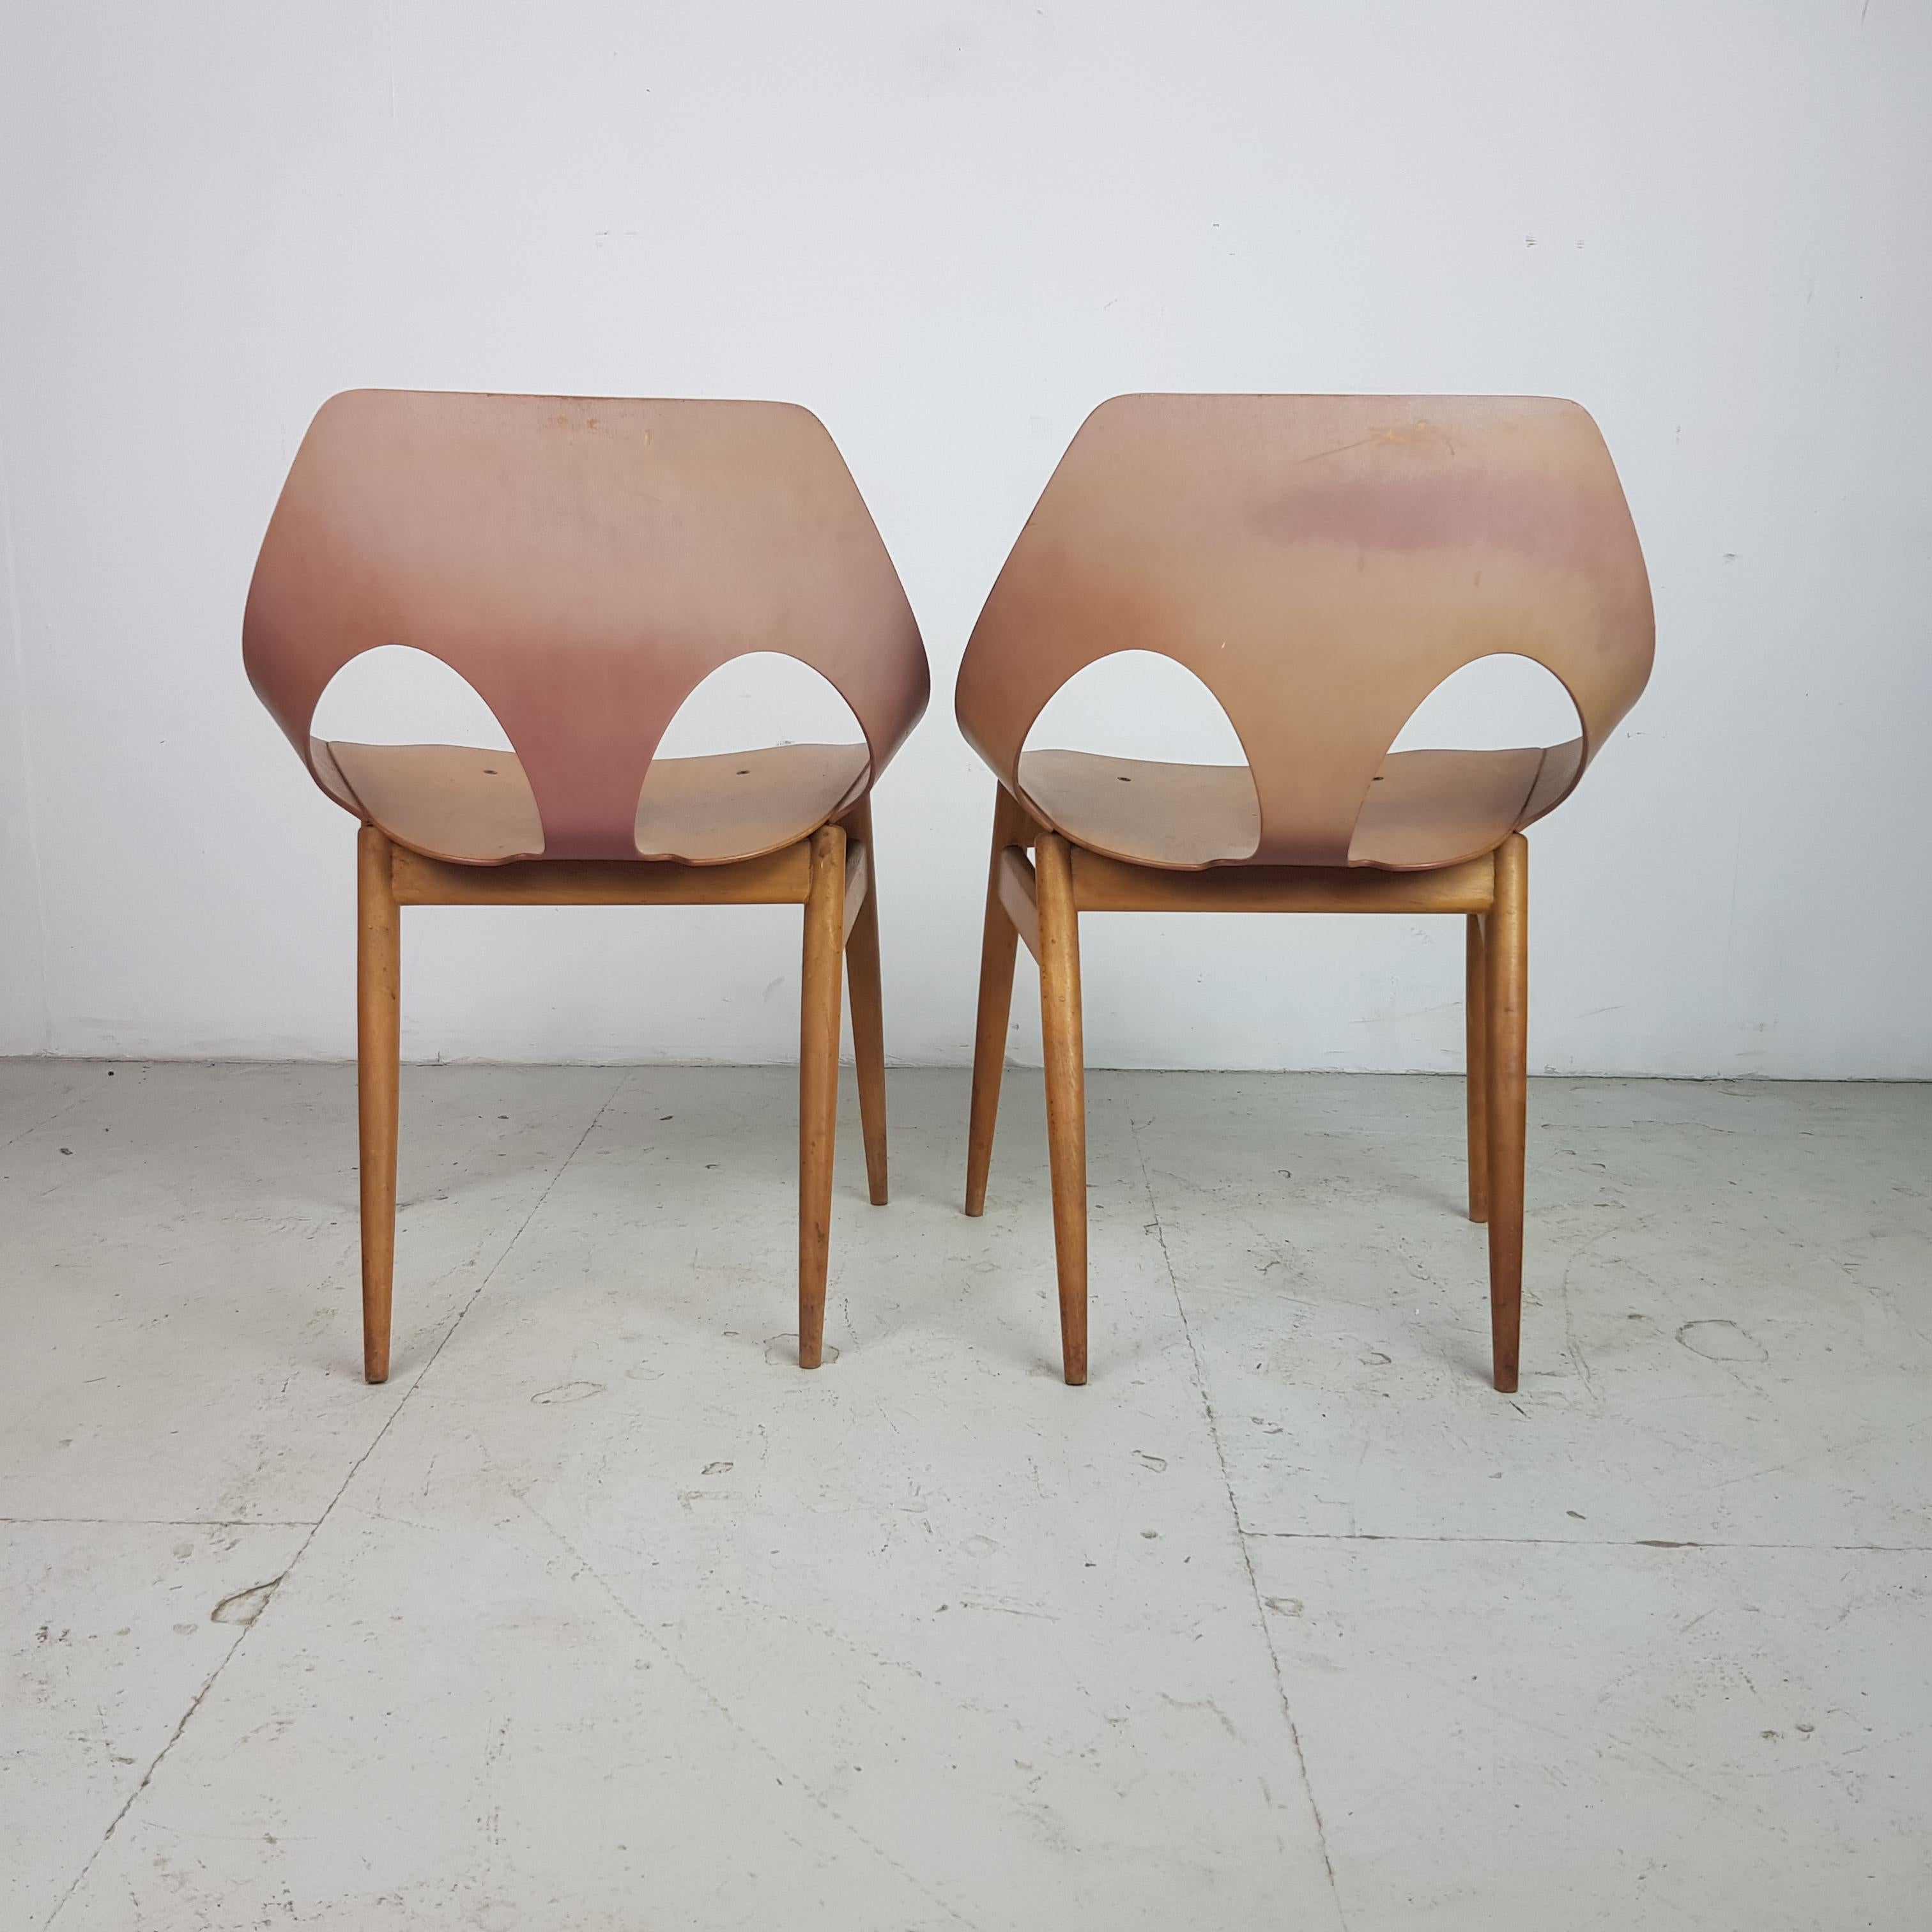 20th Century Pair of 1950s Jason Chairs Designed by Carl Jacobs & Frank Guille for Kandya For Sale